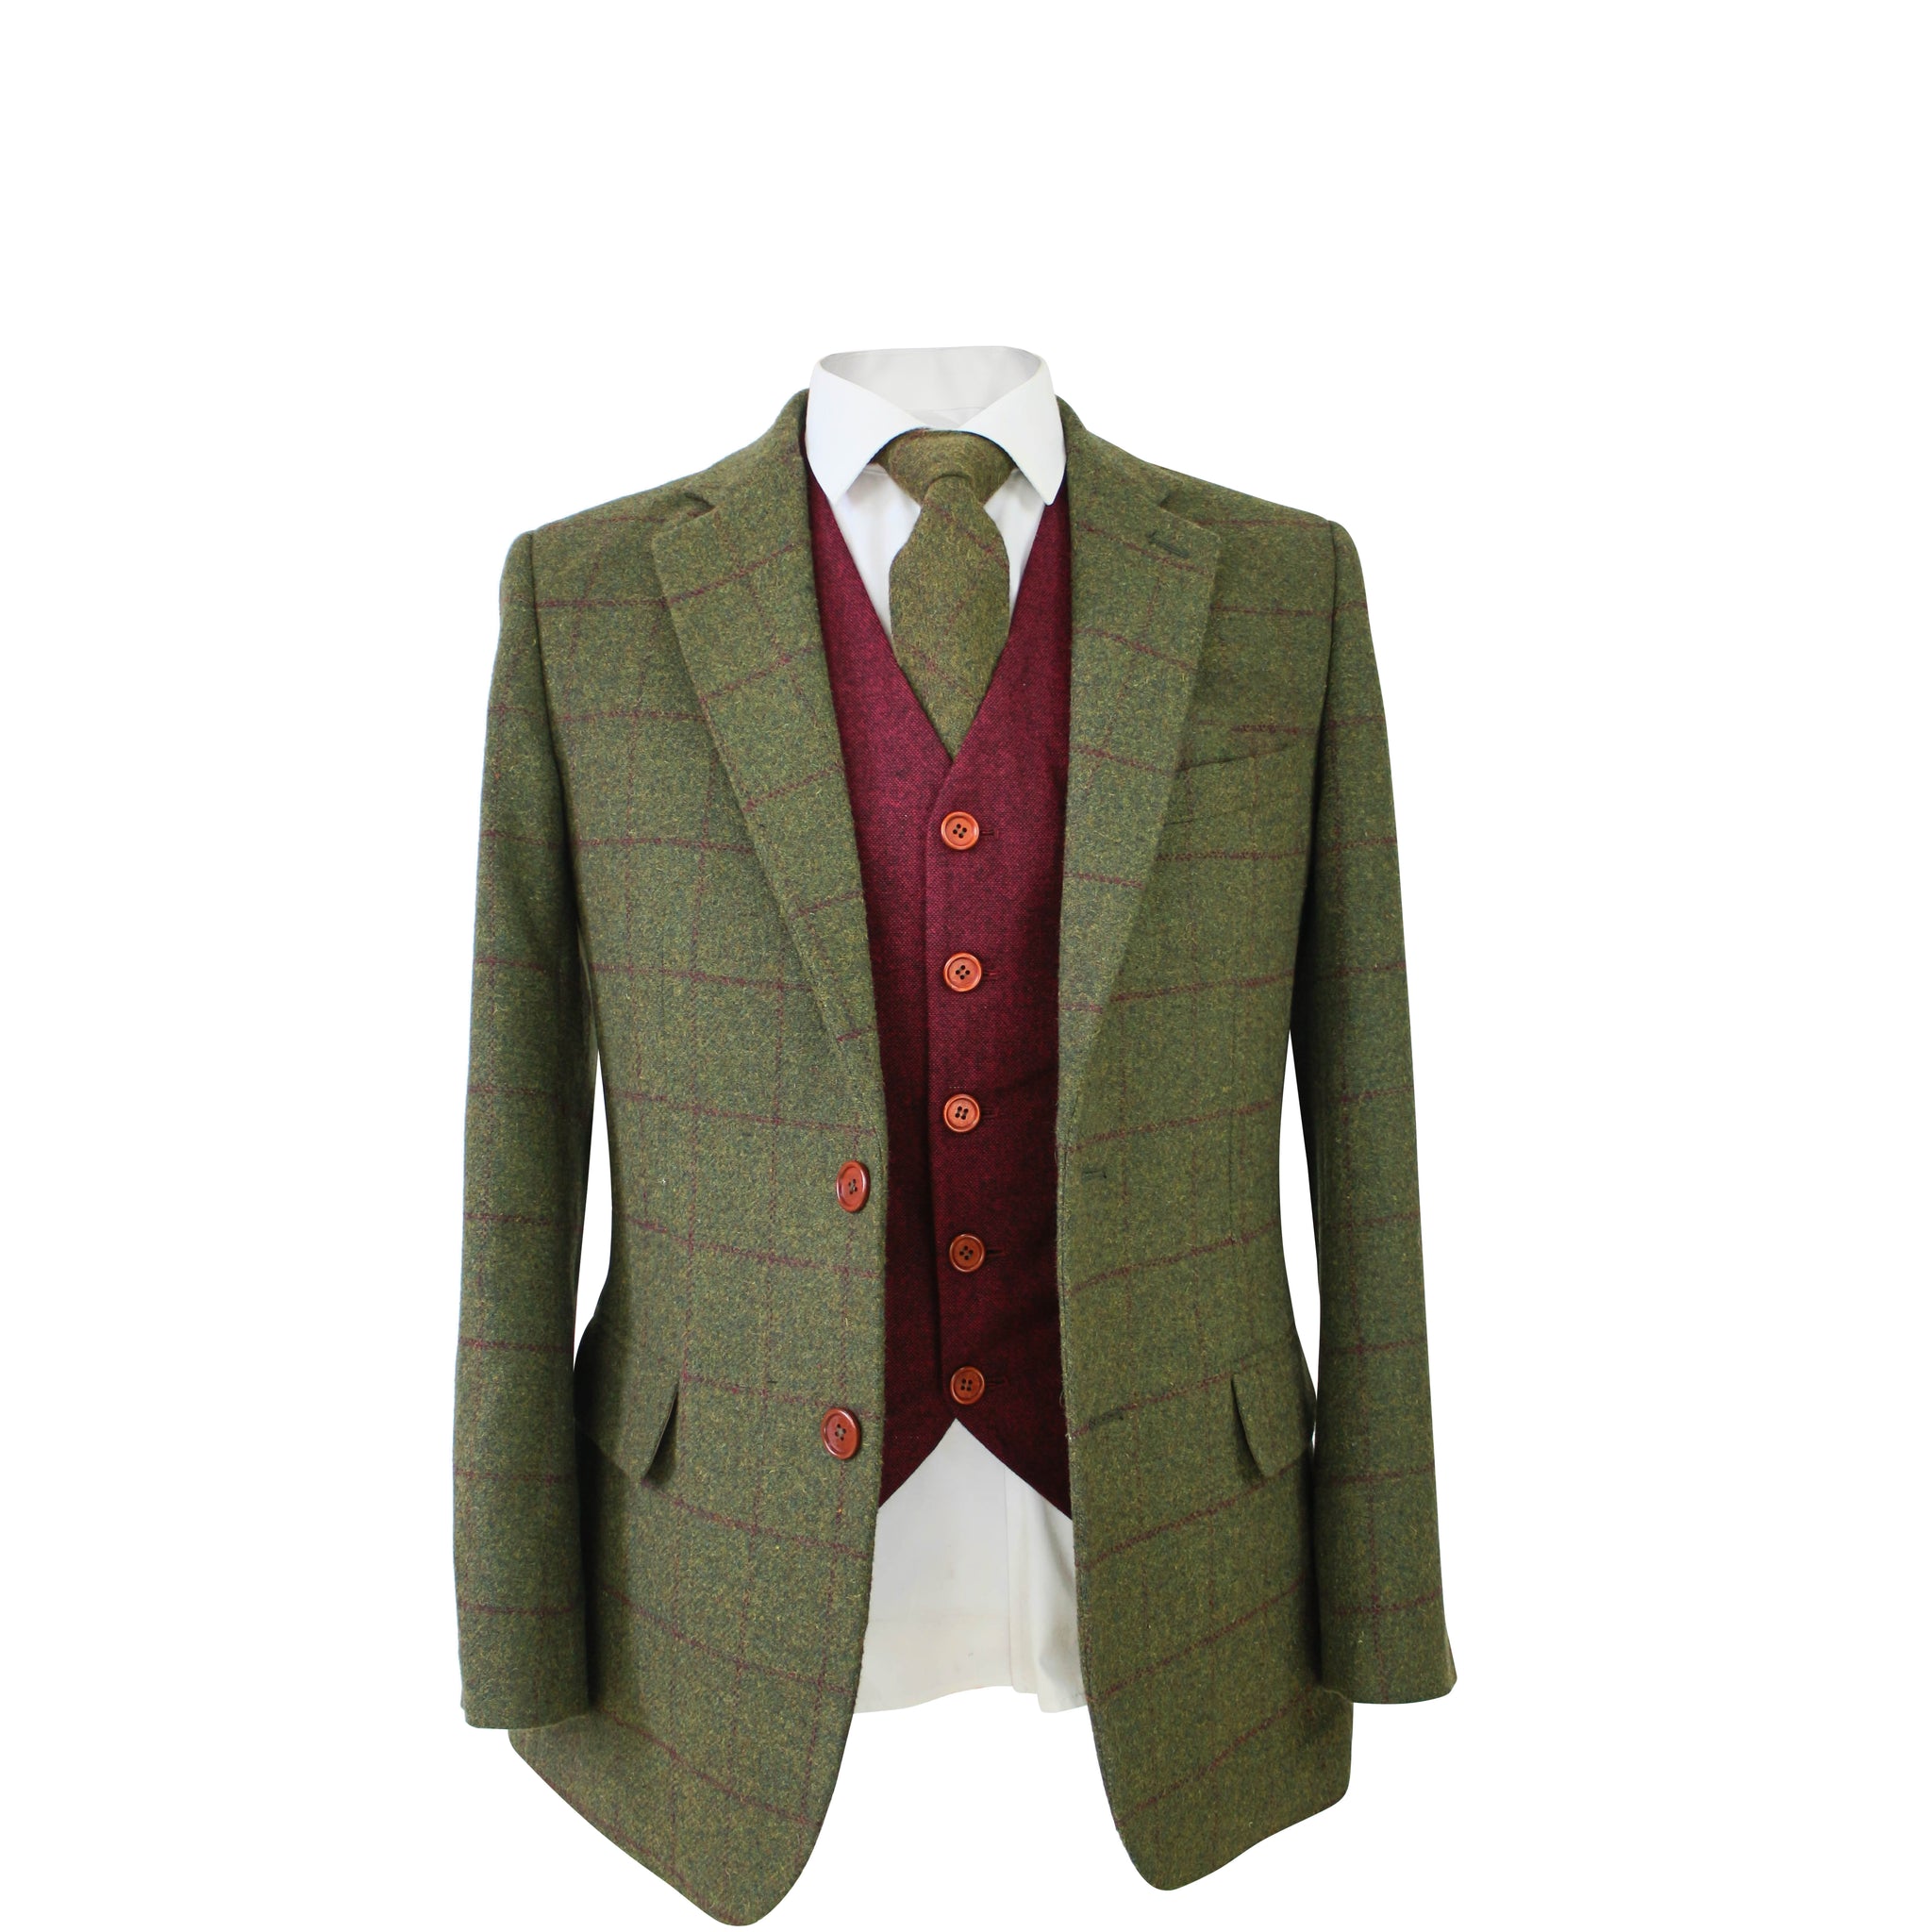 Olive Green Check Tweed Jacket Only USA Clearance